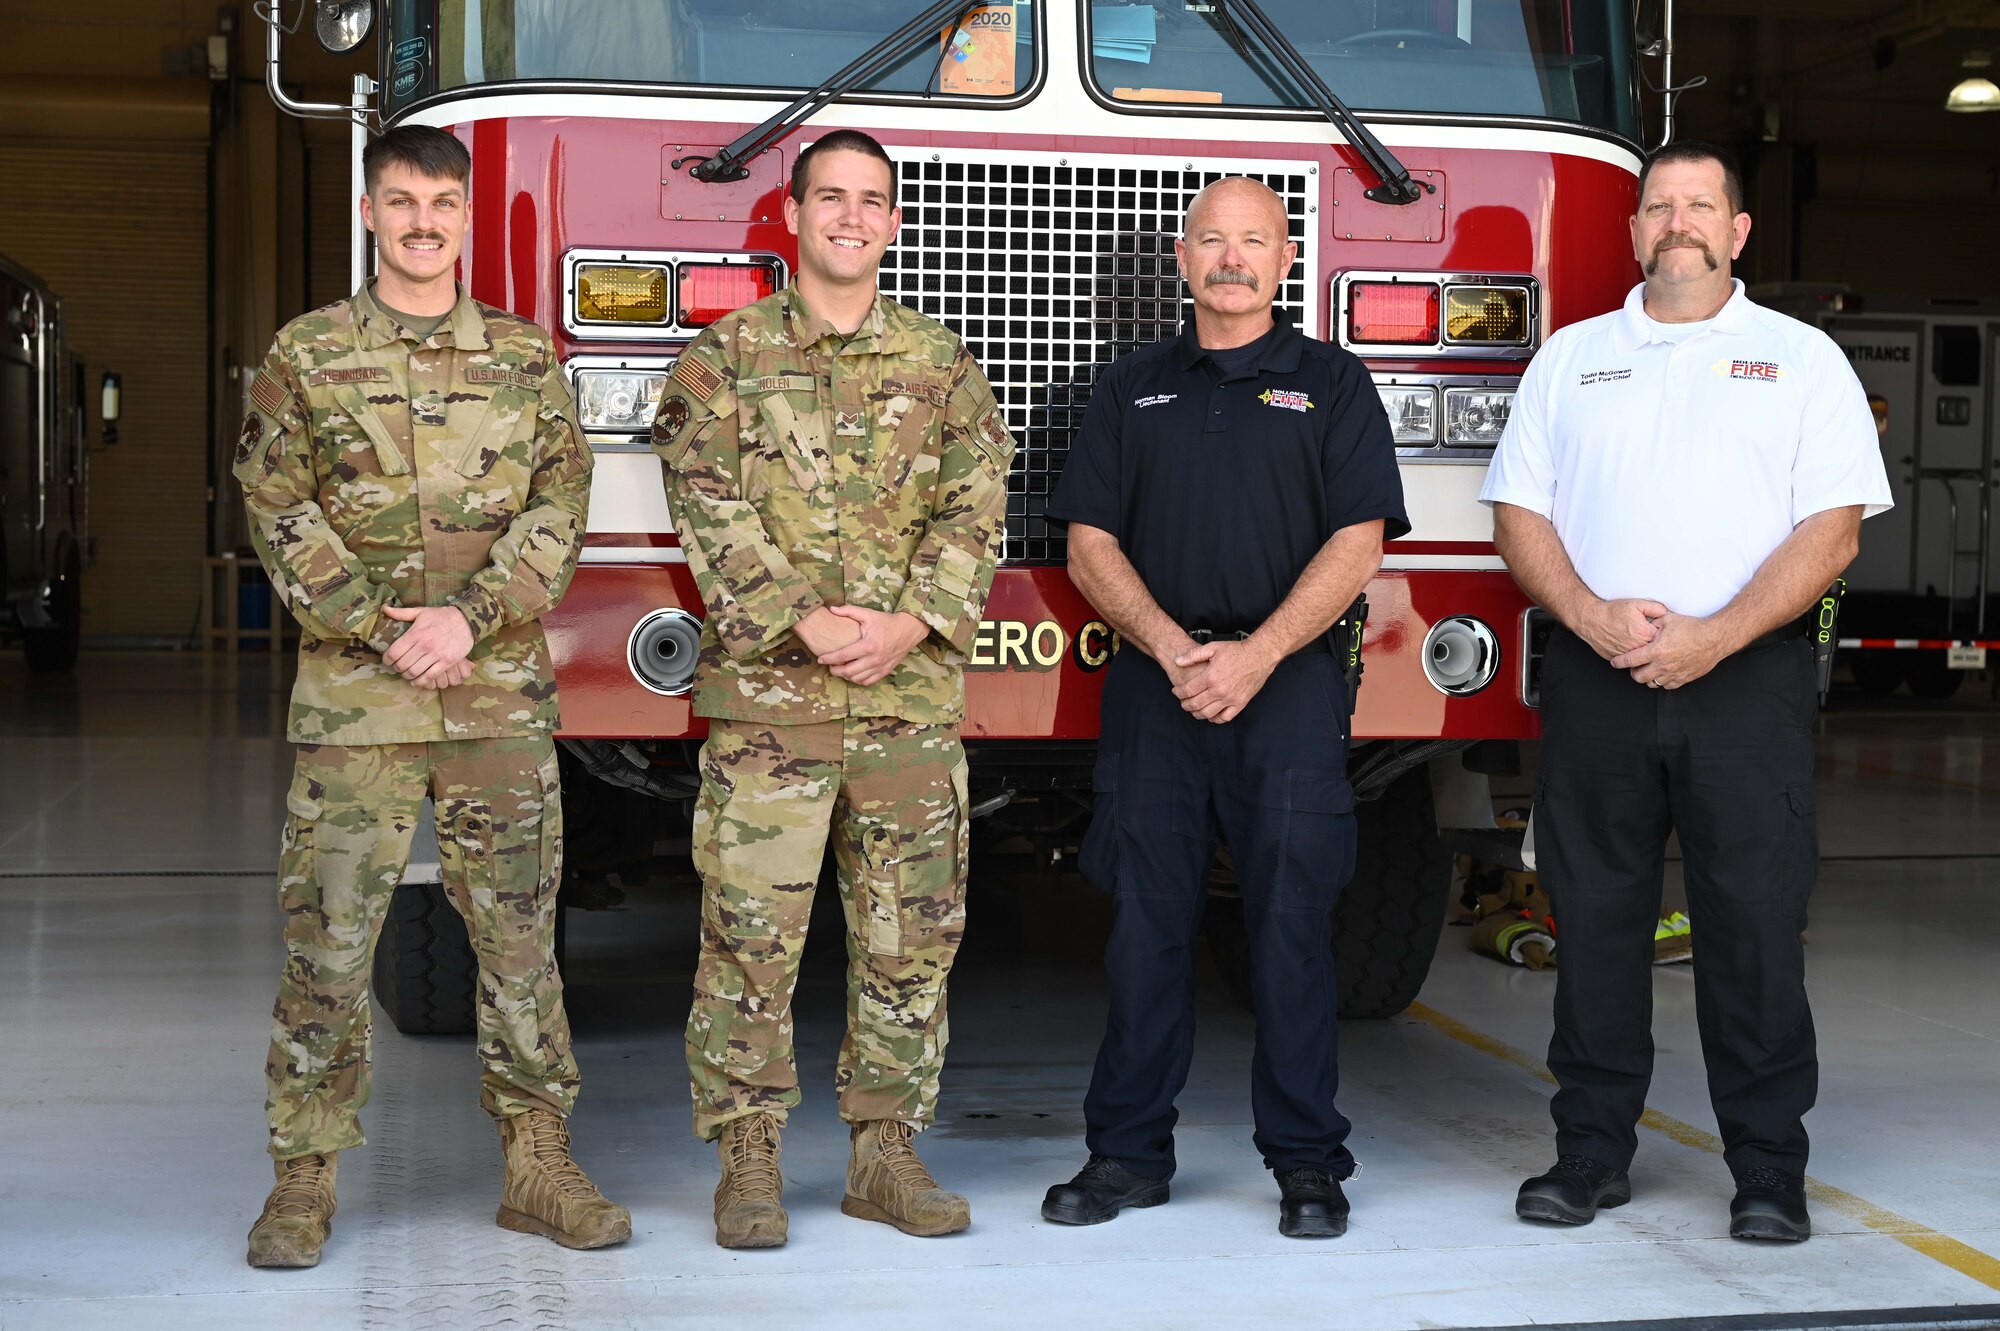 (From left to right) Airman 1st Class Joshua Hennigan, 49th Civil Engineer Squadron firefighter;  Senior Airman Cameron Nolen, 49th CES driver operator; Norman Bloom, 49th CES lead firefighter; and Todd McGowan, 49th CES assistant fire chief, pose for a photo on Holloman Air Force Base New Mexico, June 1, 2021. Hennigan, Nolen, Bloom and McGowan were on the team of first responders that helped deliver the Novotnak’s daughter. (U.S. Air Force Photo by Denise Ottaviano)